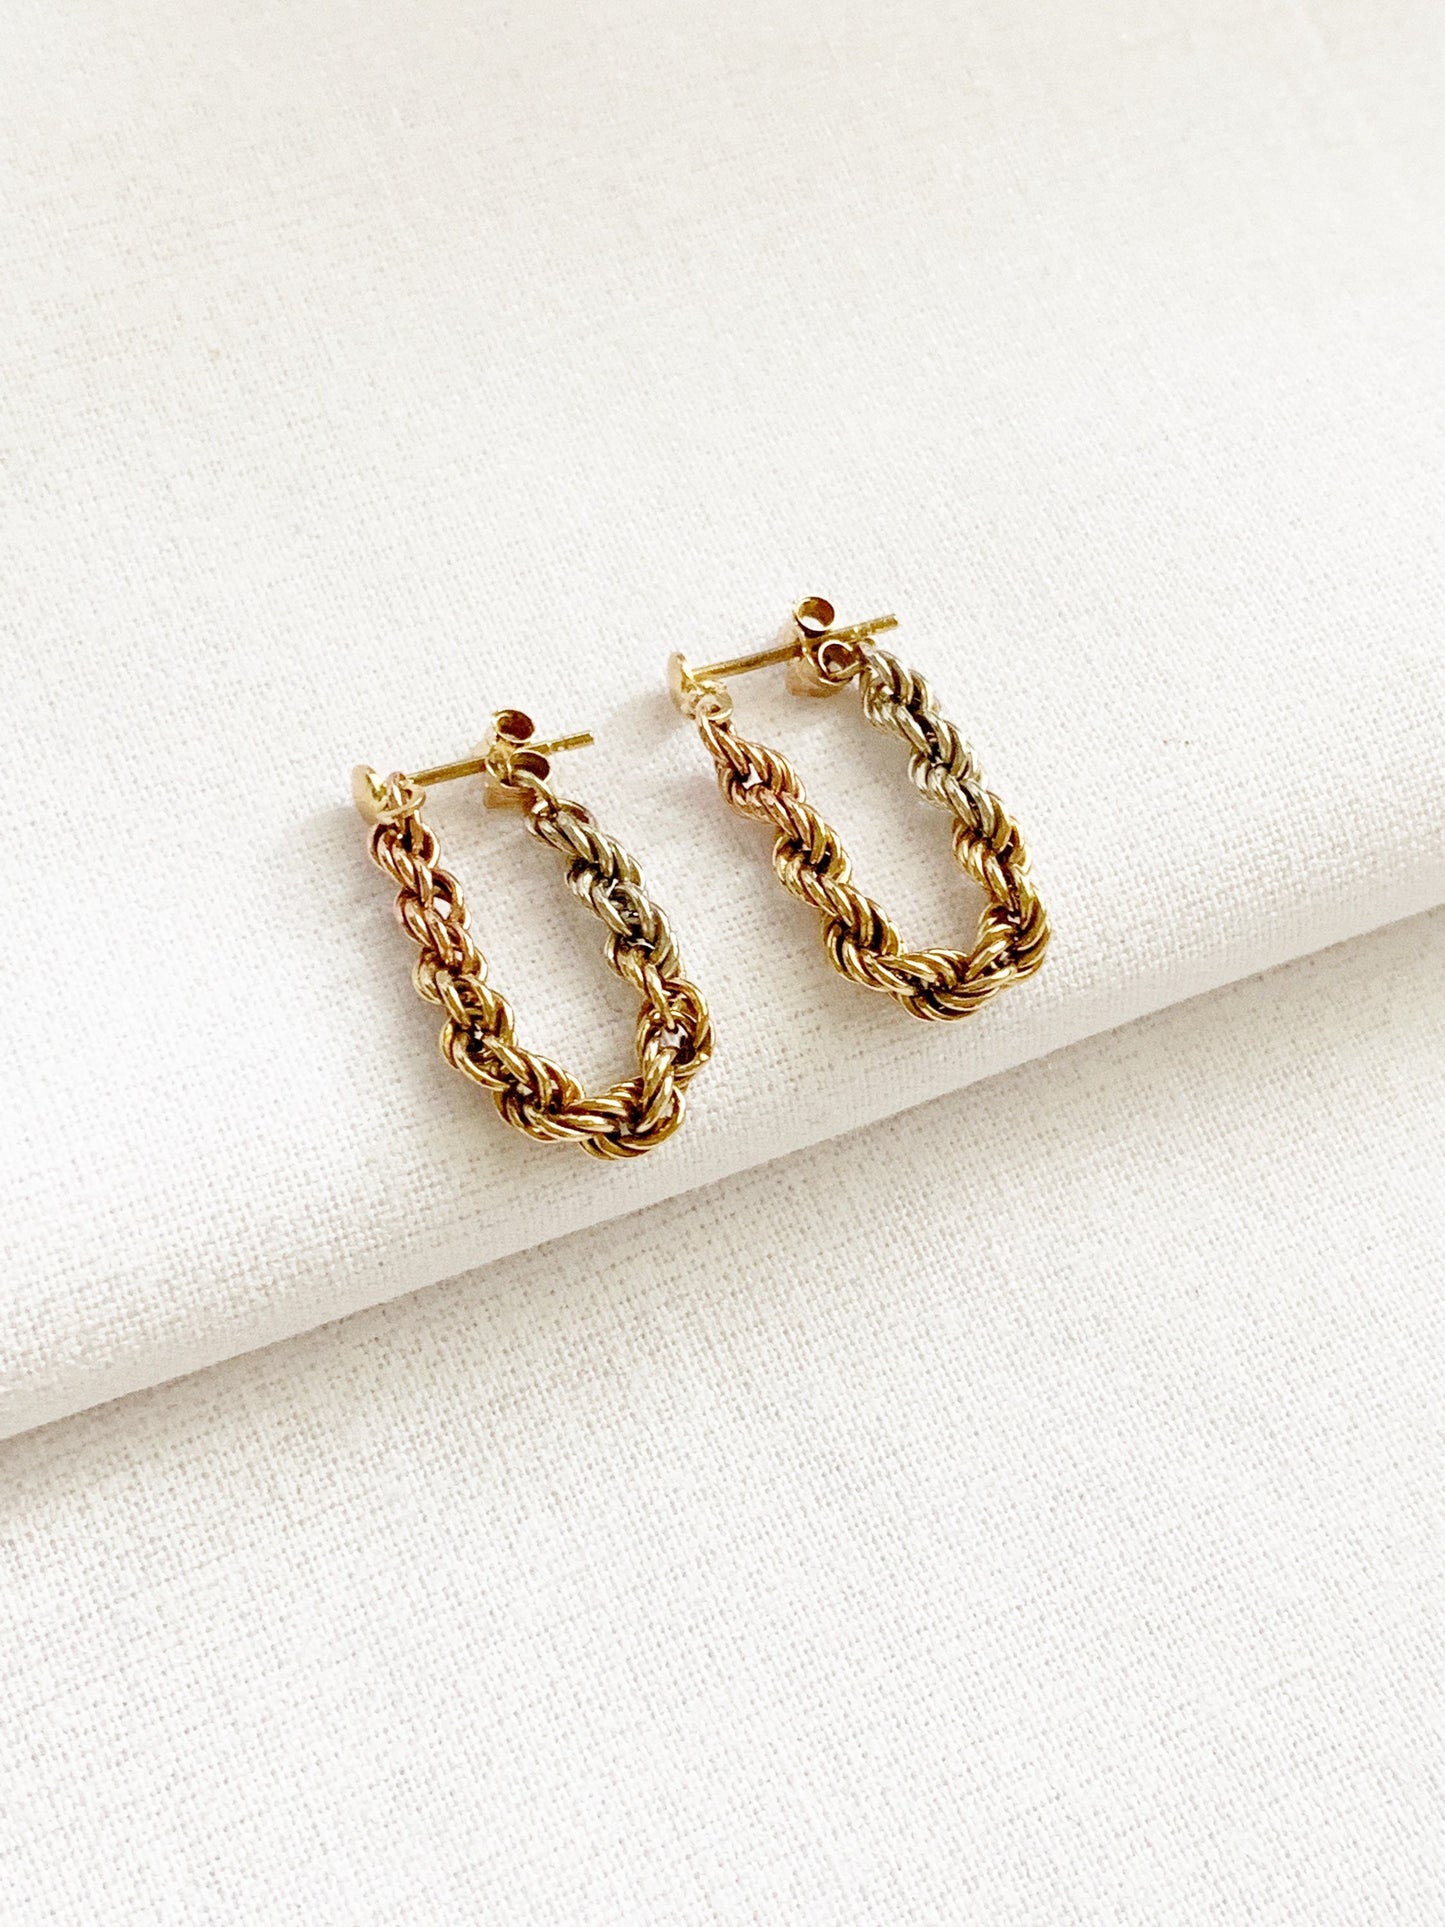 Vintage 9ct Gold 3 Colour Ombre Chain Earrings